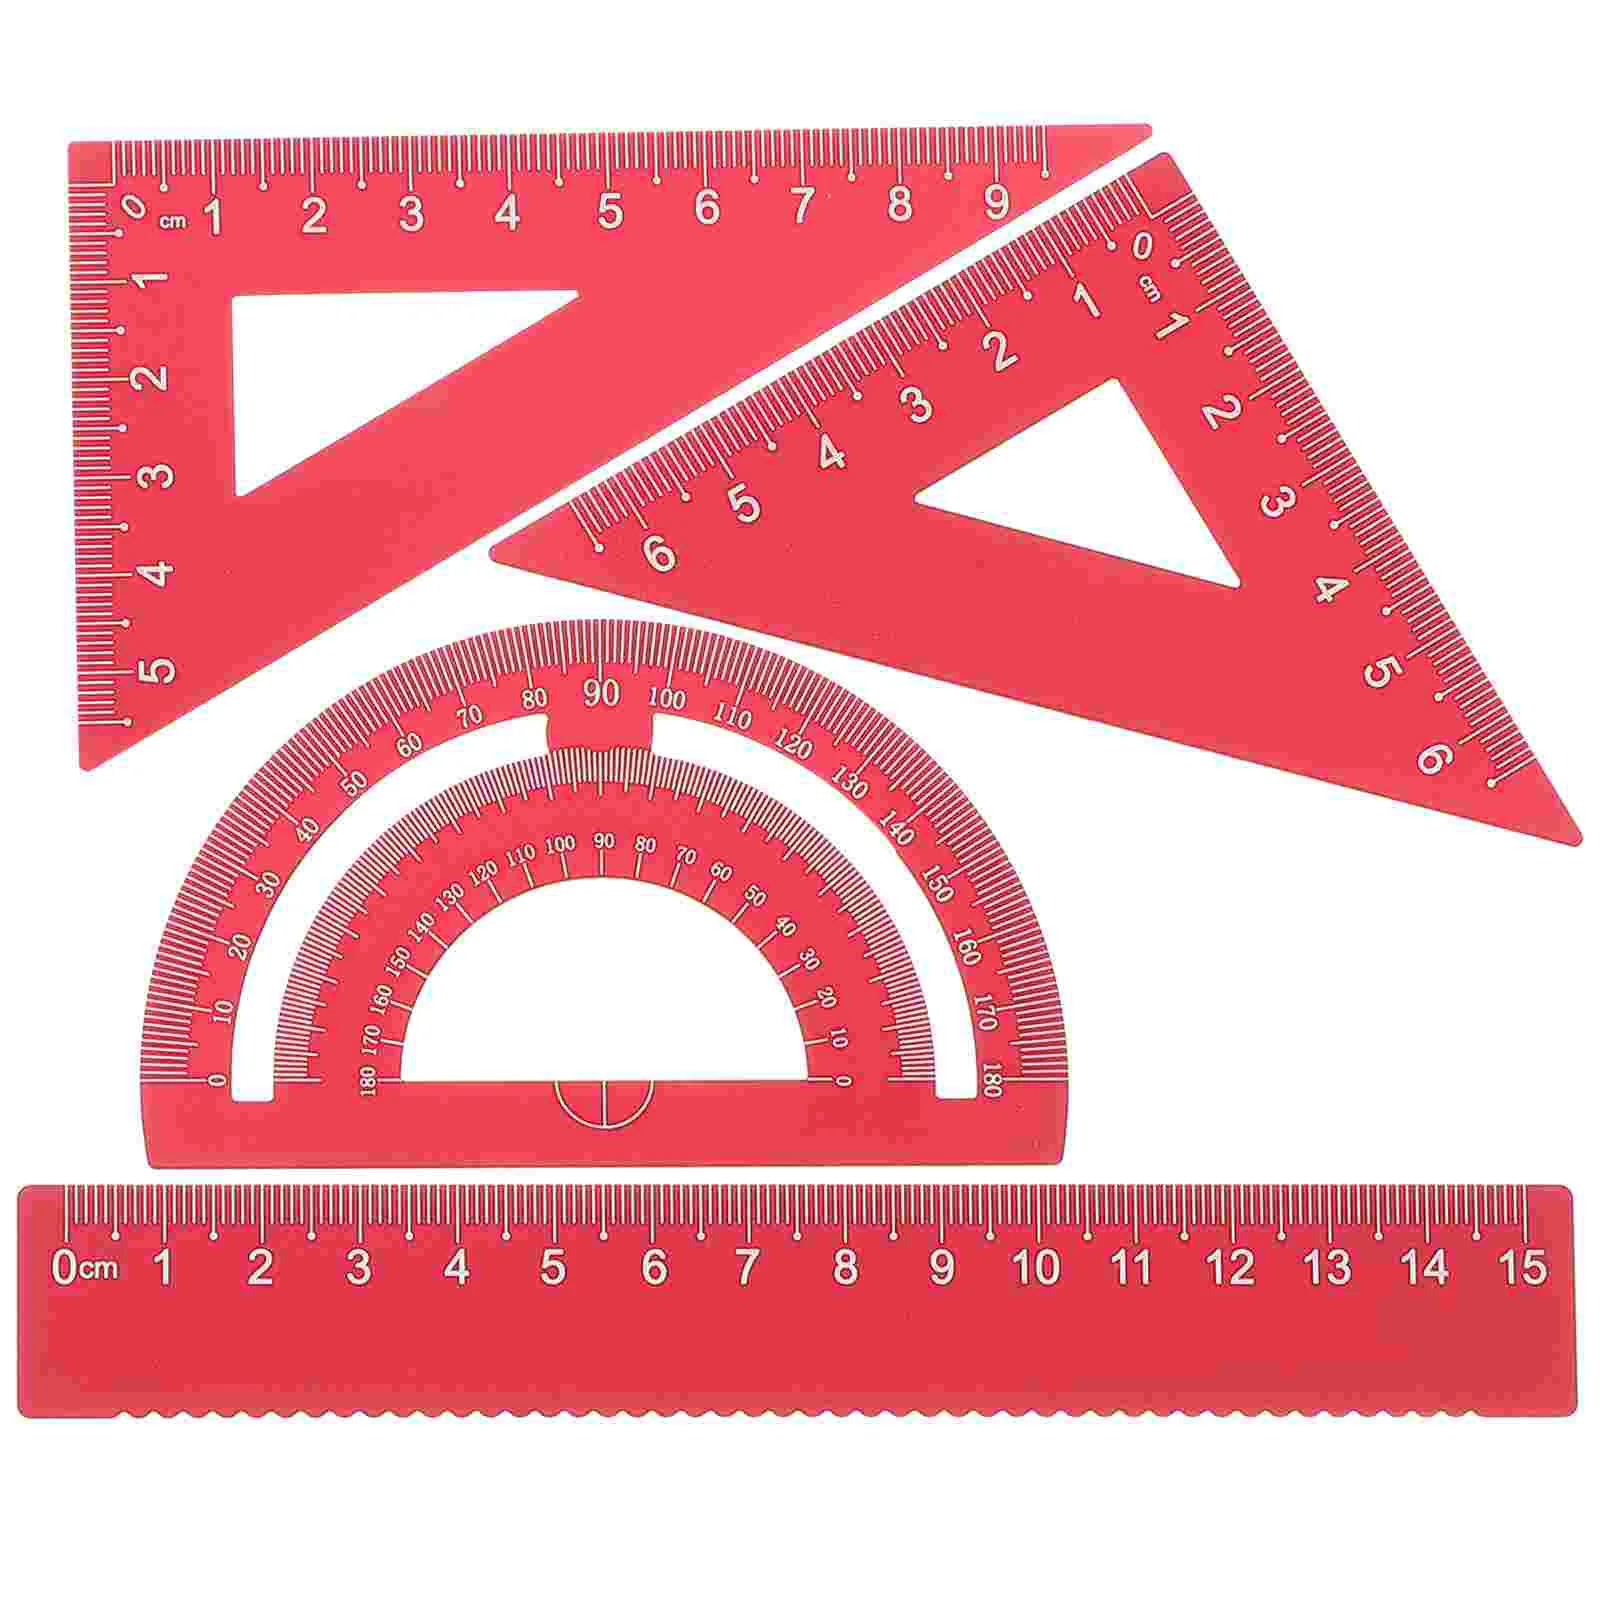 4 Pack Geometry Set Metal Triangle Ruler Protractor Straight Ruler Tool Set Math Protractor School and Office Supplies for Kids 15 20cm plastic transparent straight rulers grid ruler protractor stationery set for kids students gift office school supplies